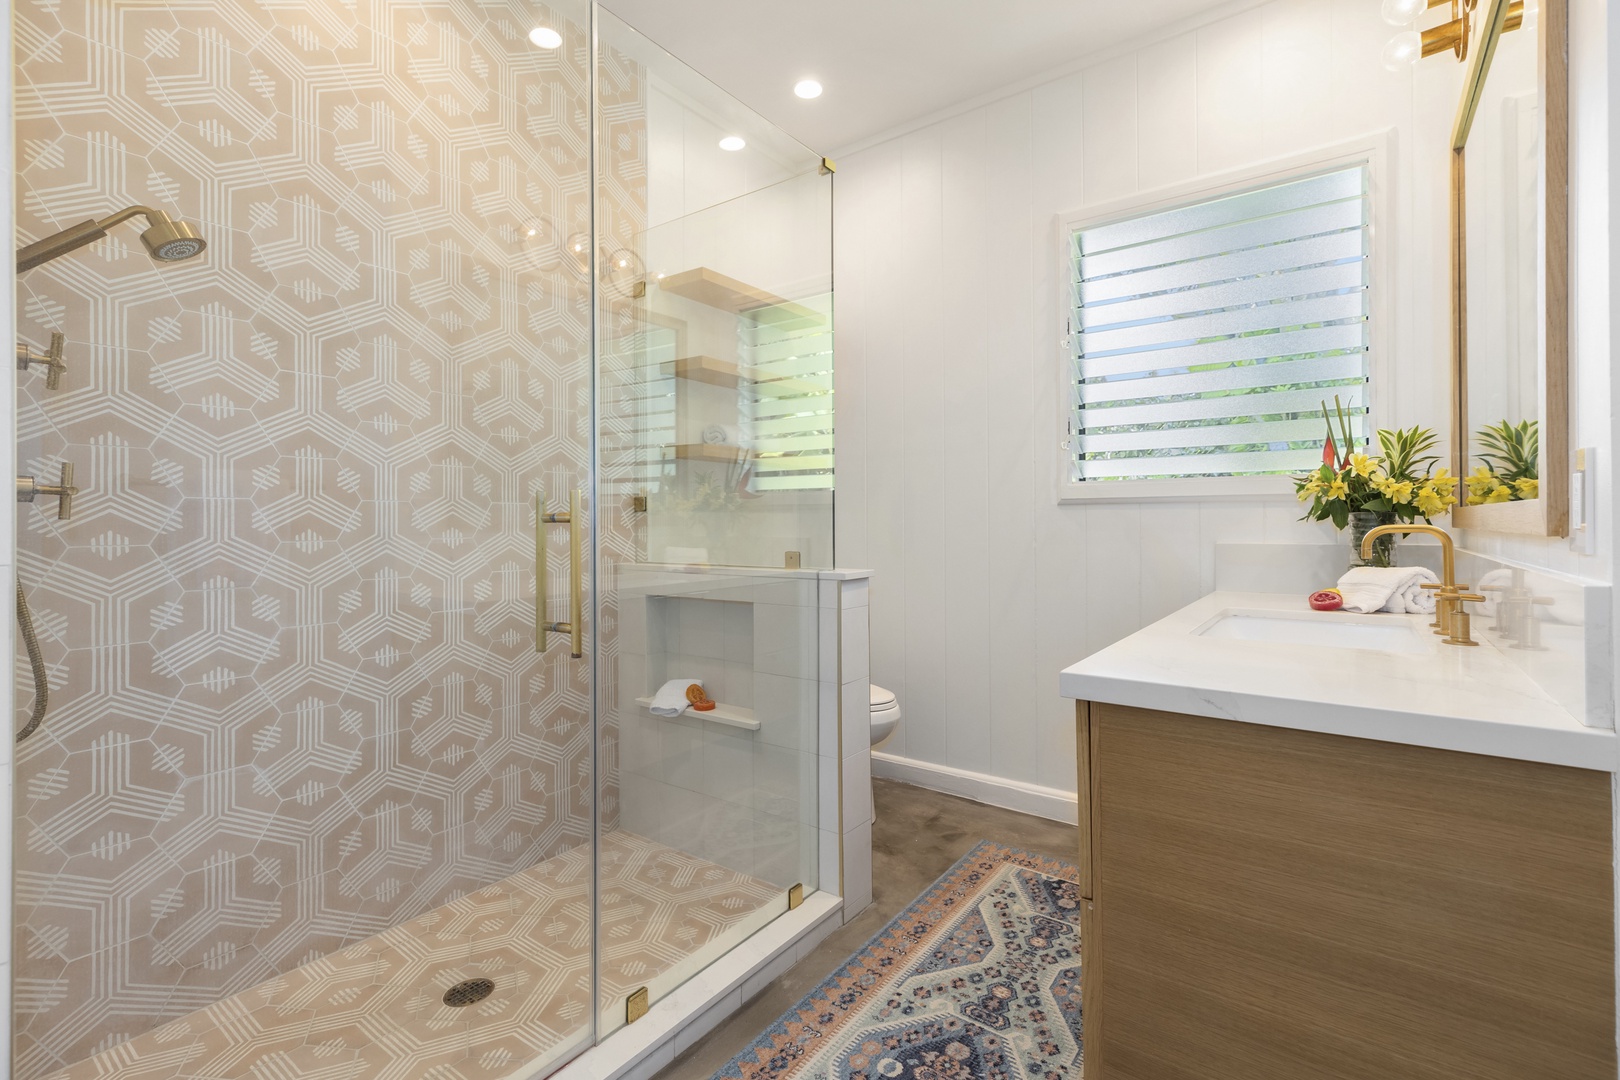 Kailua Vacation Rentals, Lanikai Hideaway - Guest bath with designer tile and glass wall shower